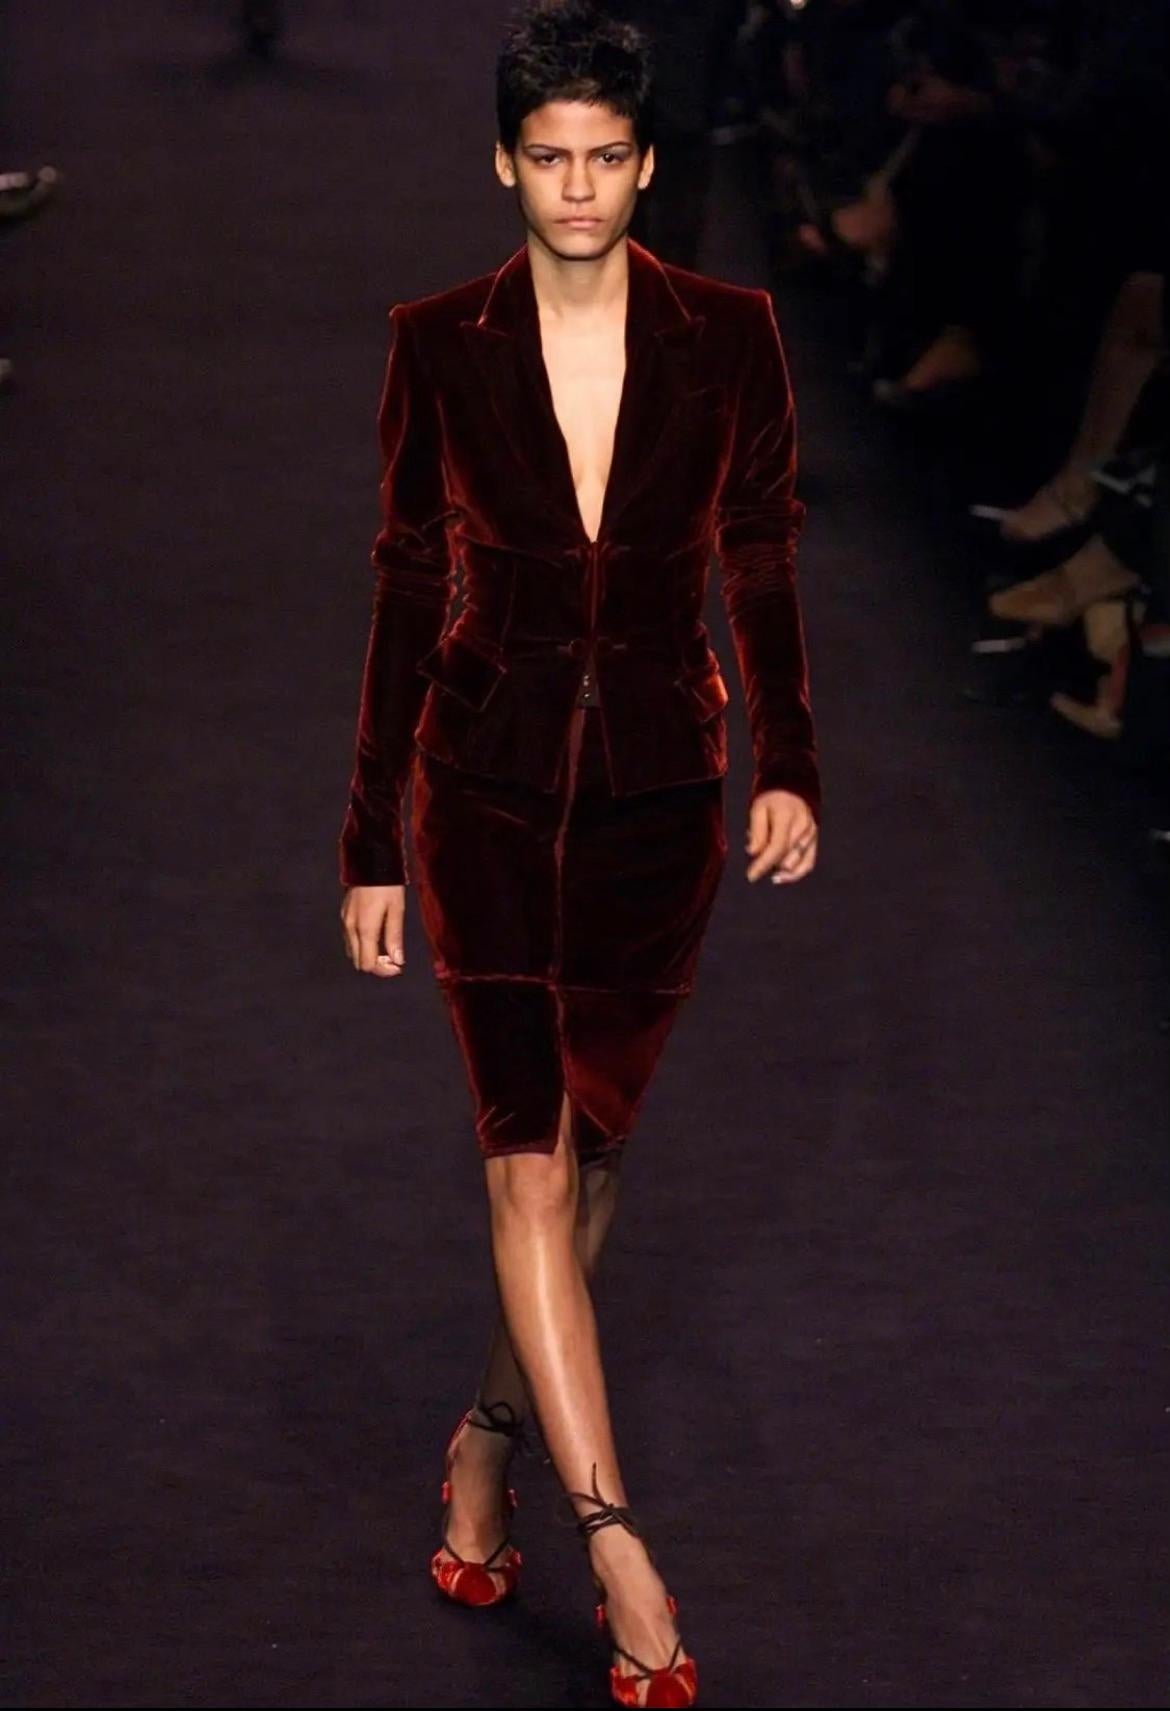 Presenting a fabulous navy blue velvet Yves Saint Laurent Rive Gauche skirt suit, designed by Tom Ford. From the Fall/Winter 2002 collection, this skirt suit debuted on the season's runway in red as look 7, modeled by Omahyra Mota. The suit was also